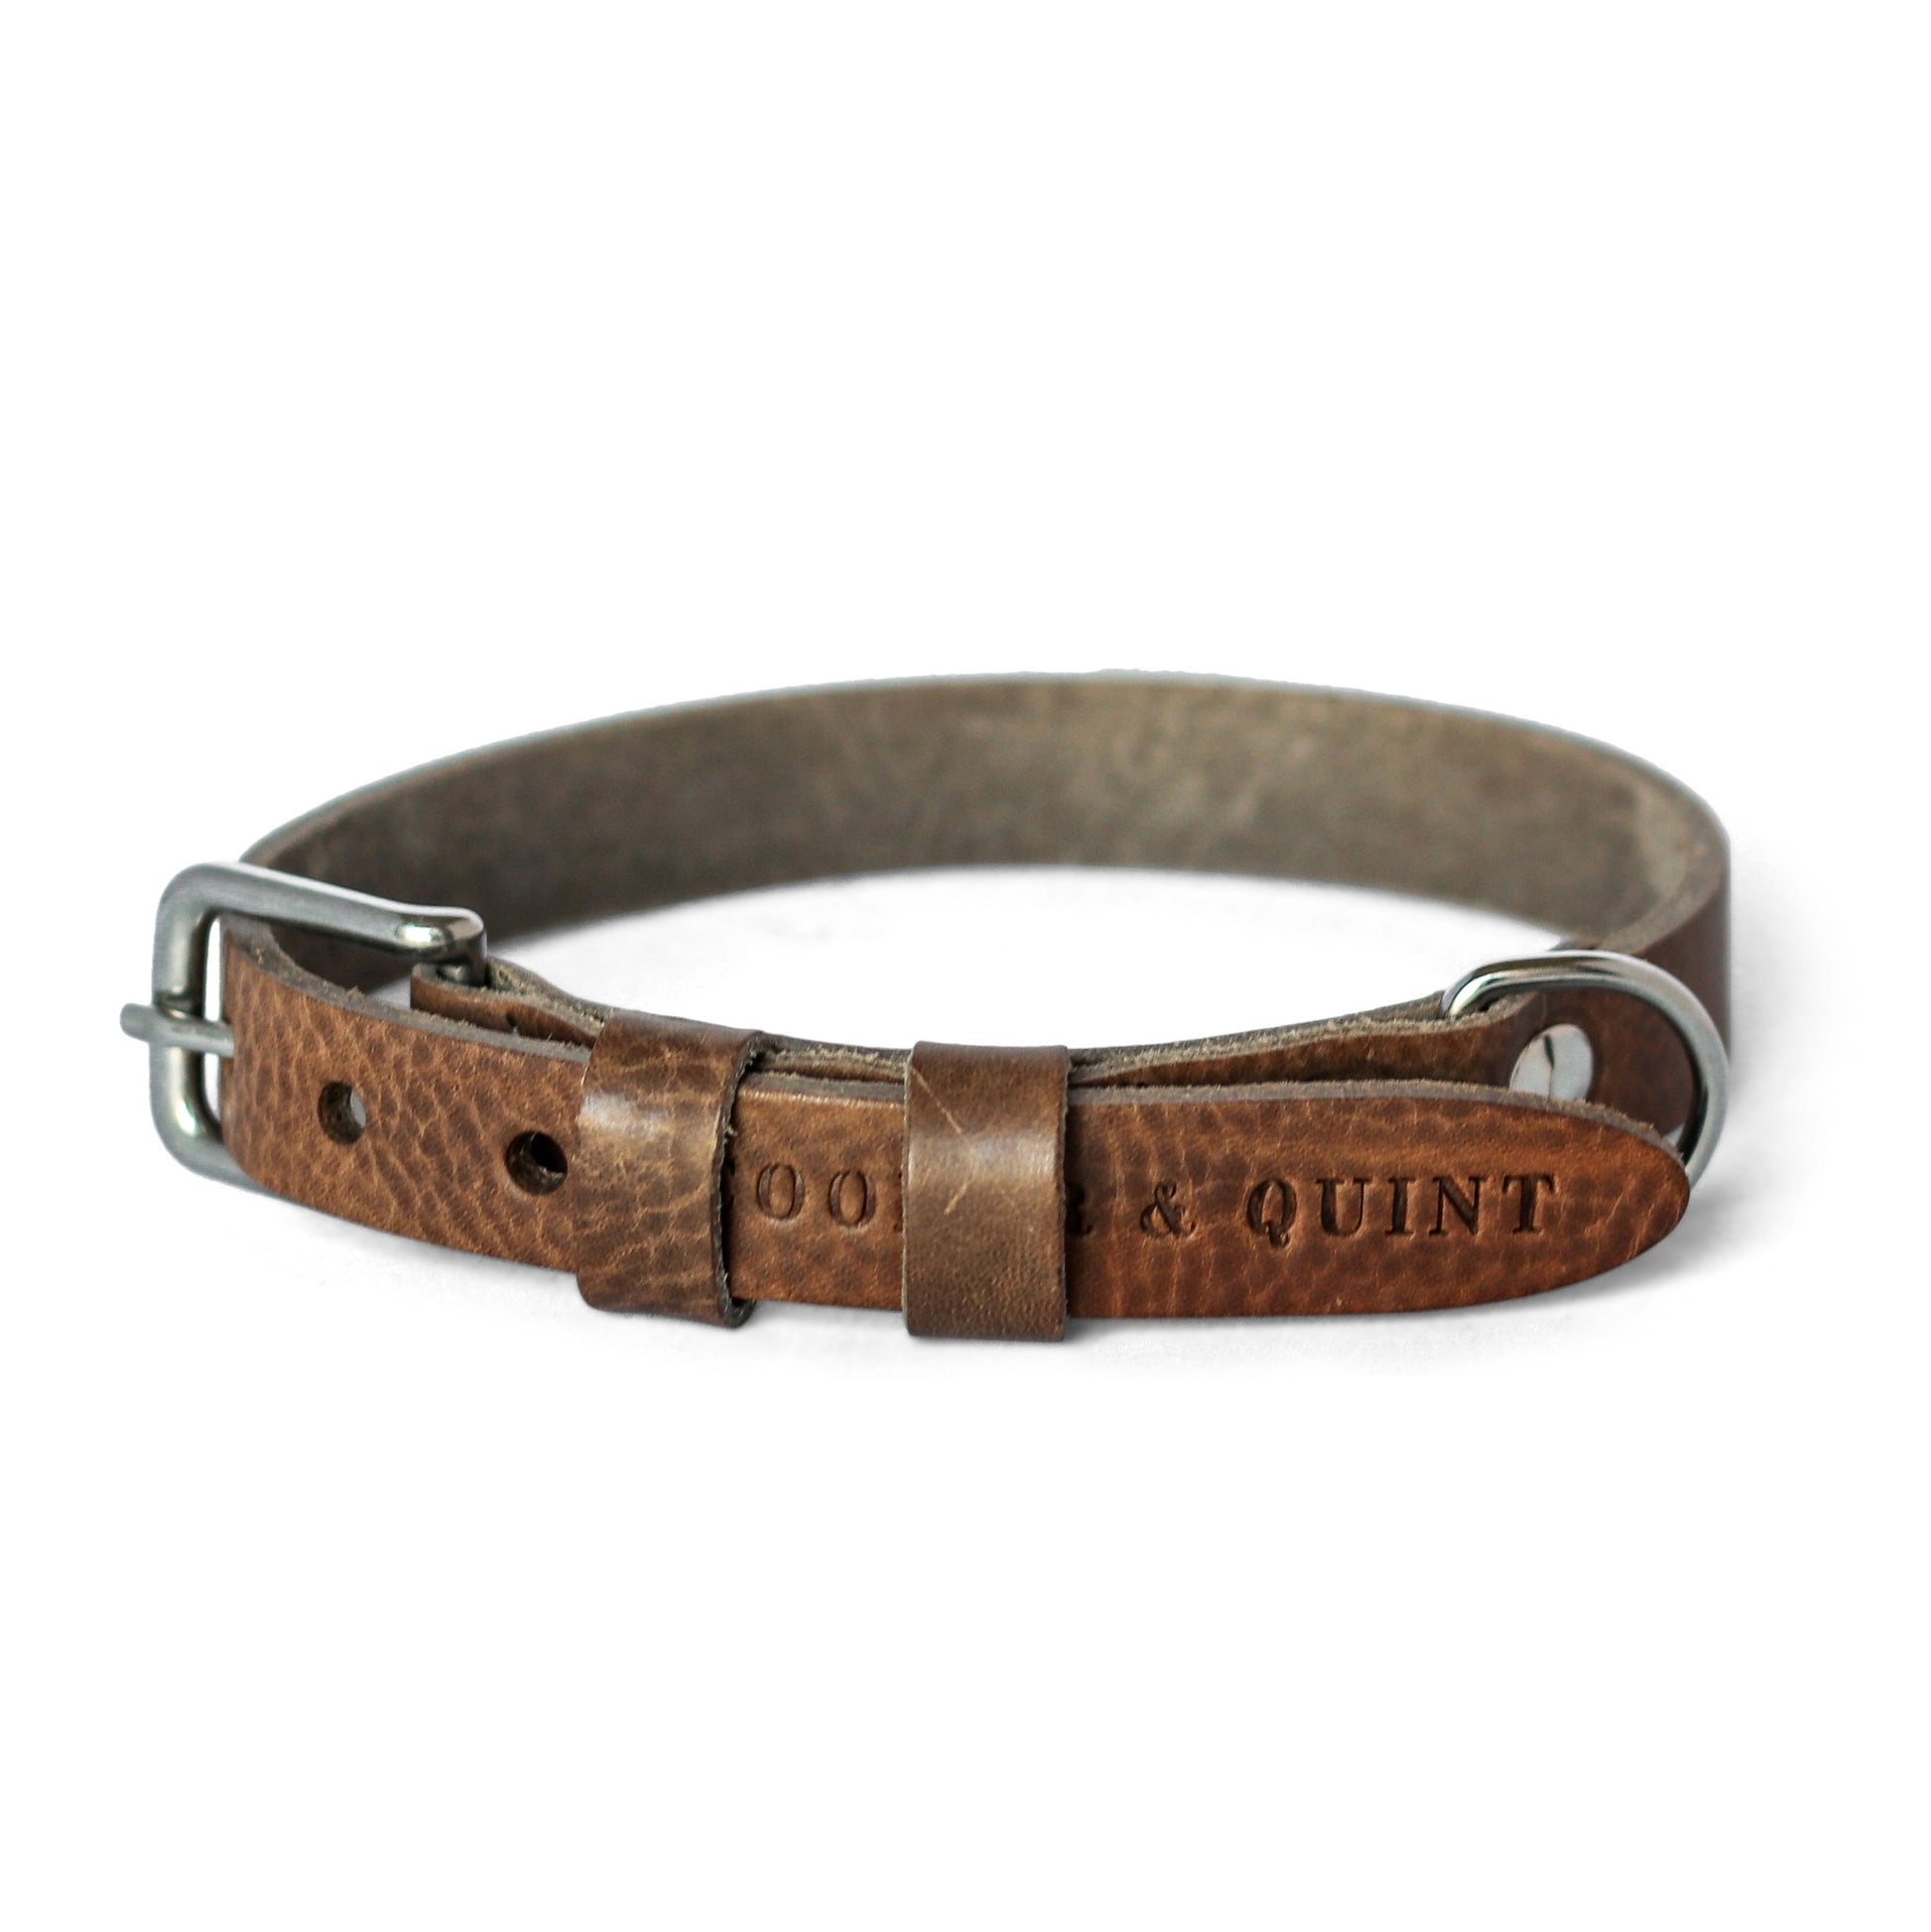 Double Trouble Halsband Hond Leer Stone - Cooper & Quint